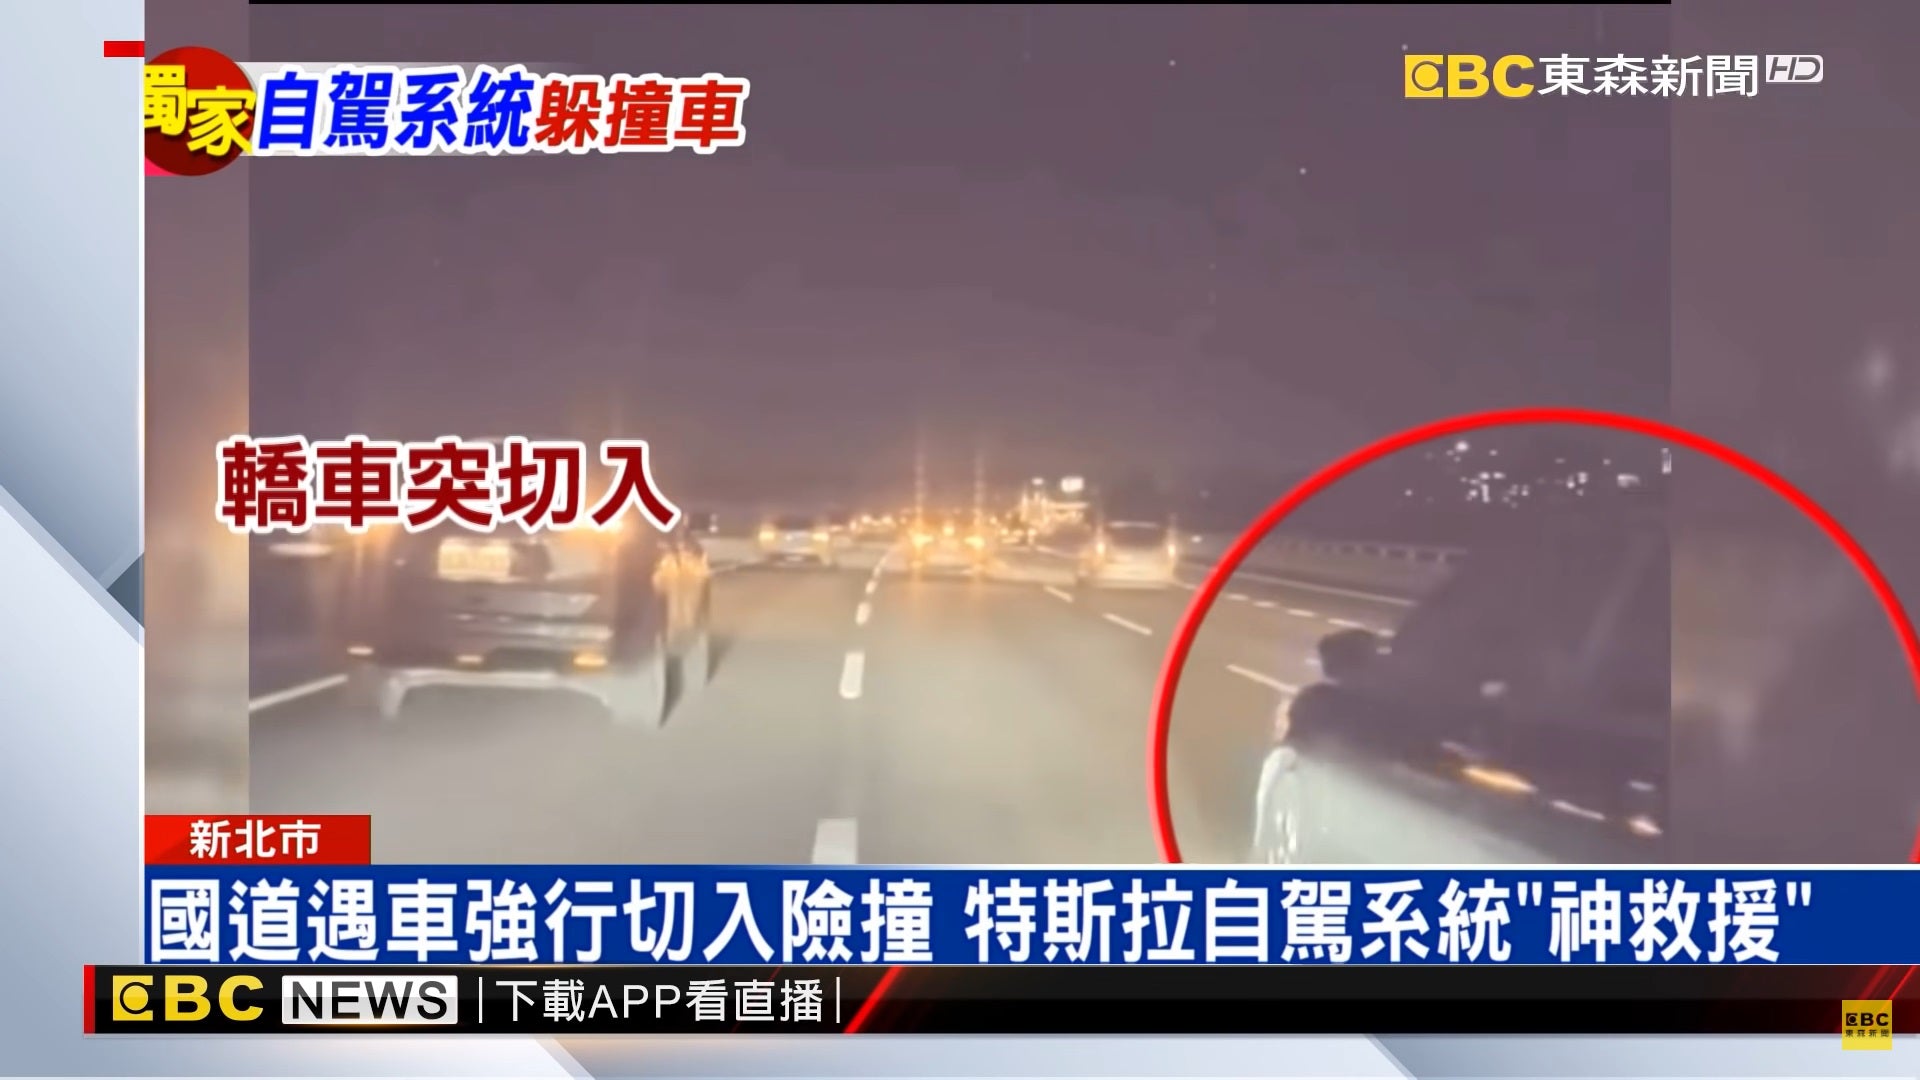 Tesla Autopilot Avoids Major Accident in Taiwan, Likely Unavoidable by Human Driver